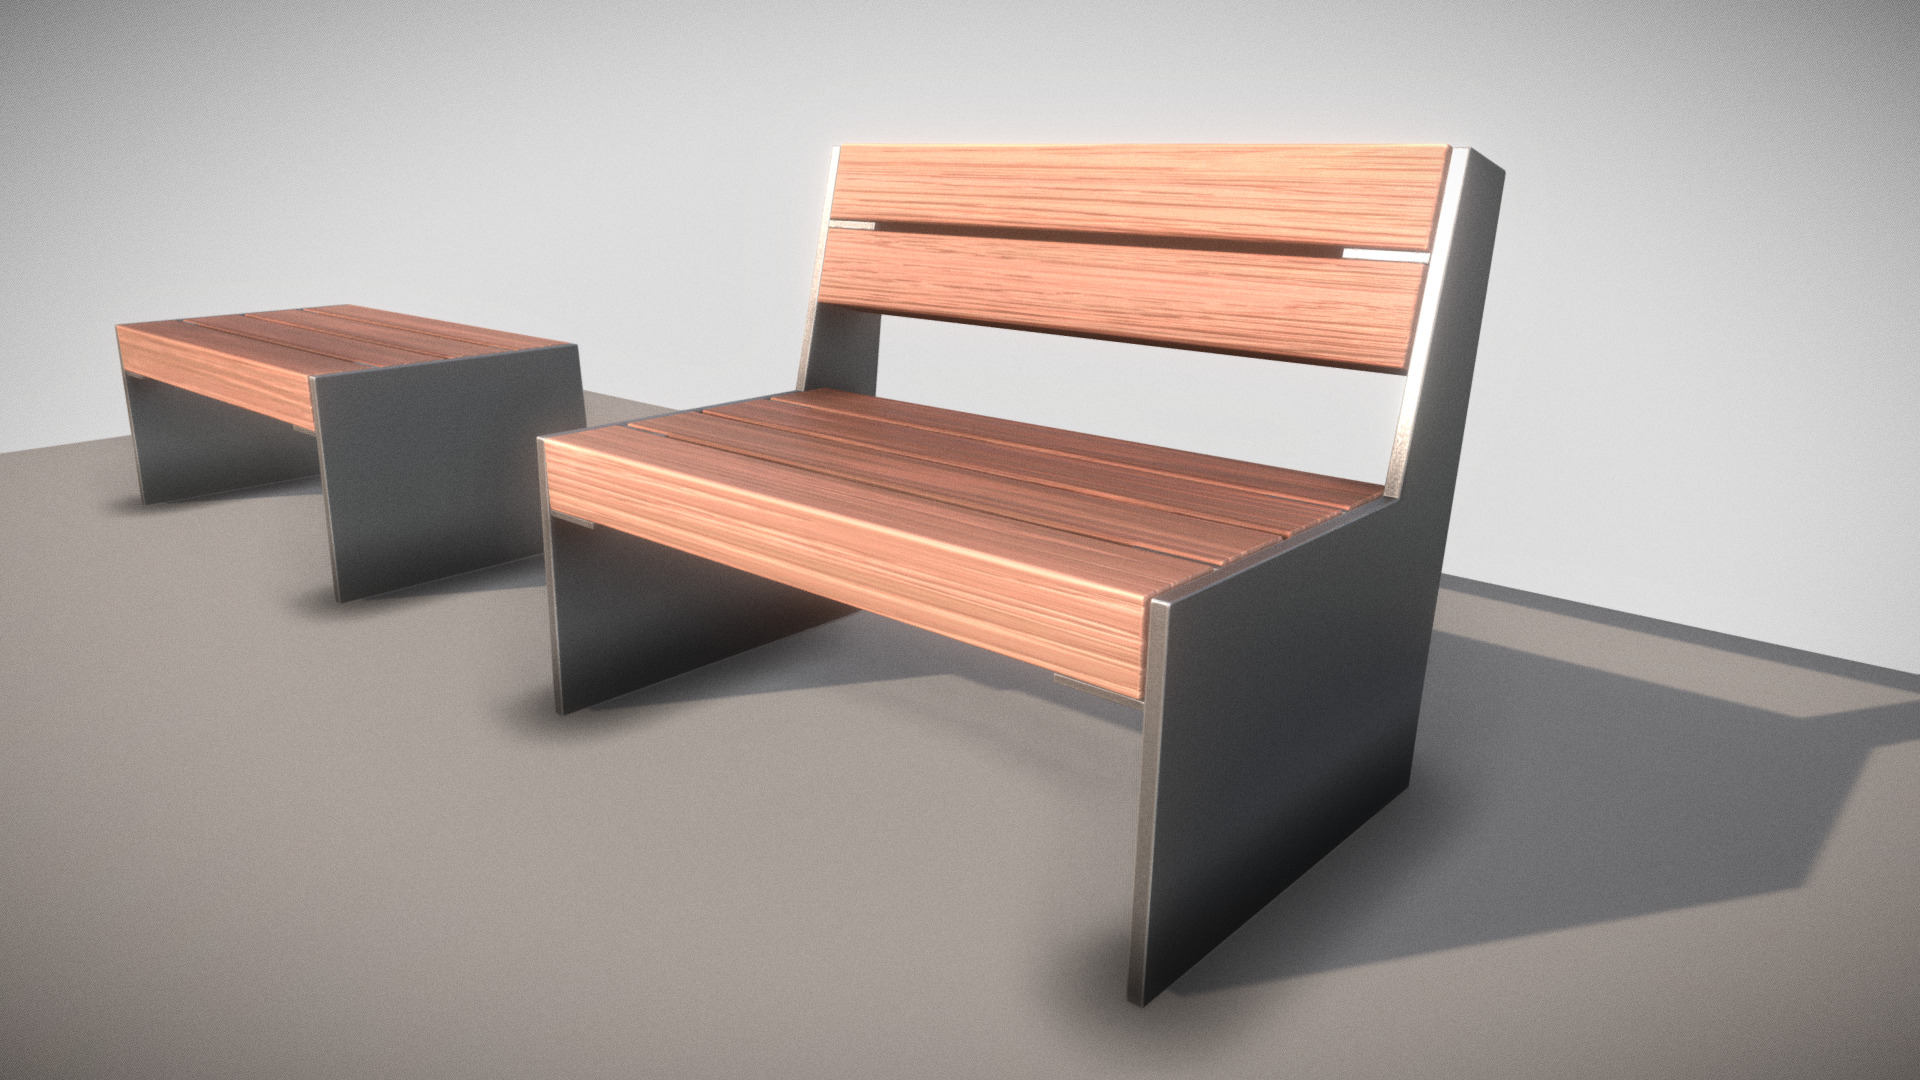 3D model Park Bench [8] (High-Poly Version) - This is a 3D model of the Park Bench [8] (High-Poly Version). The 3D model is about a wooden bench on a white background.